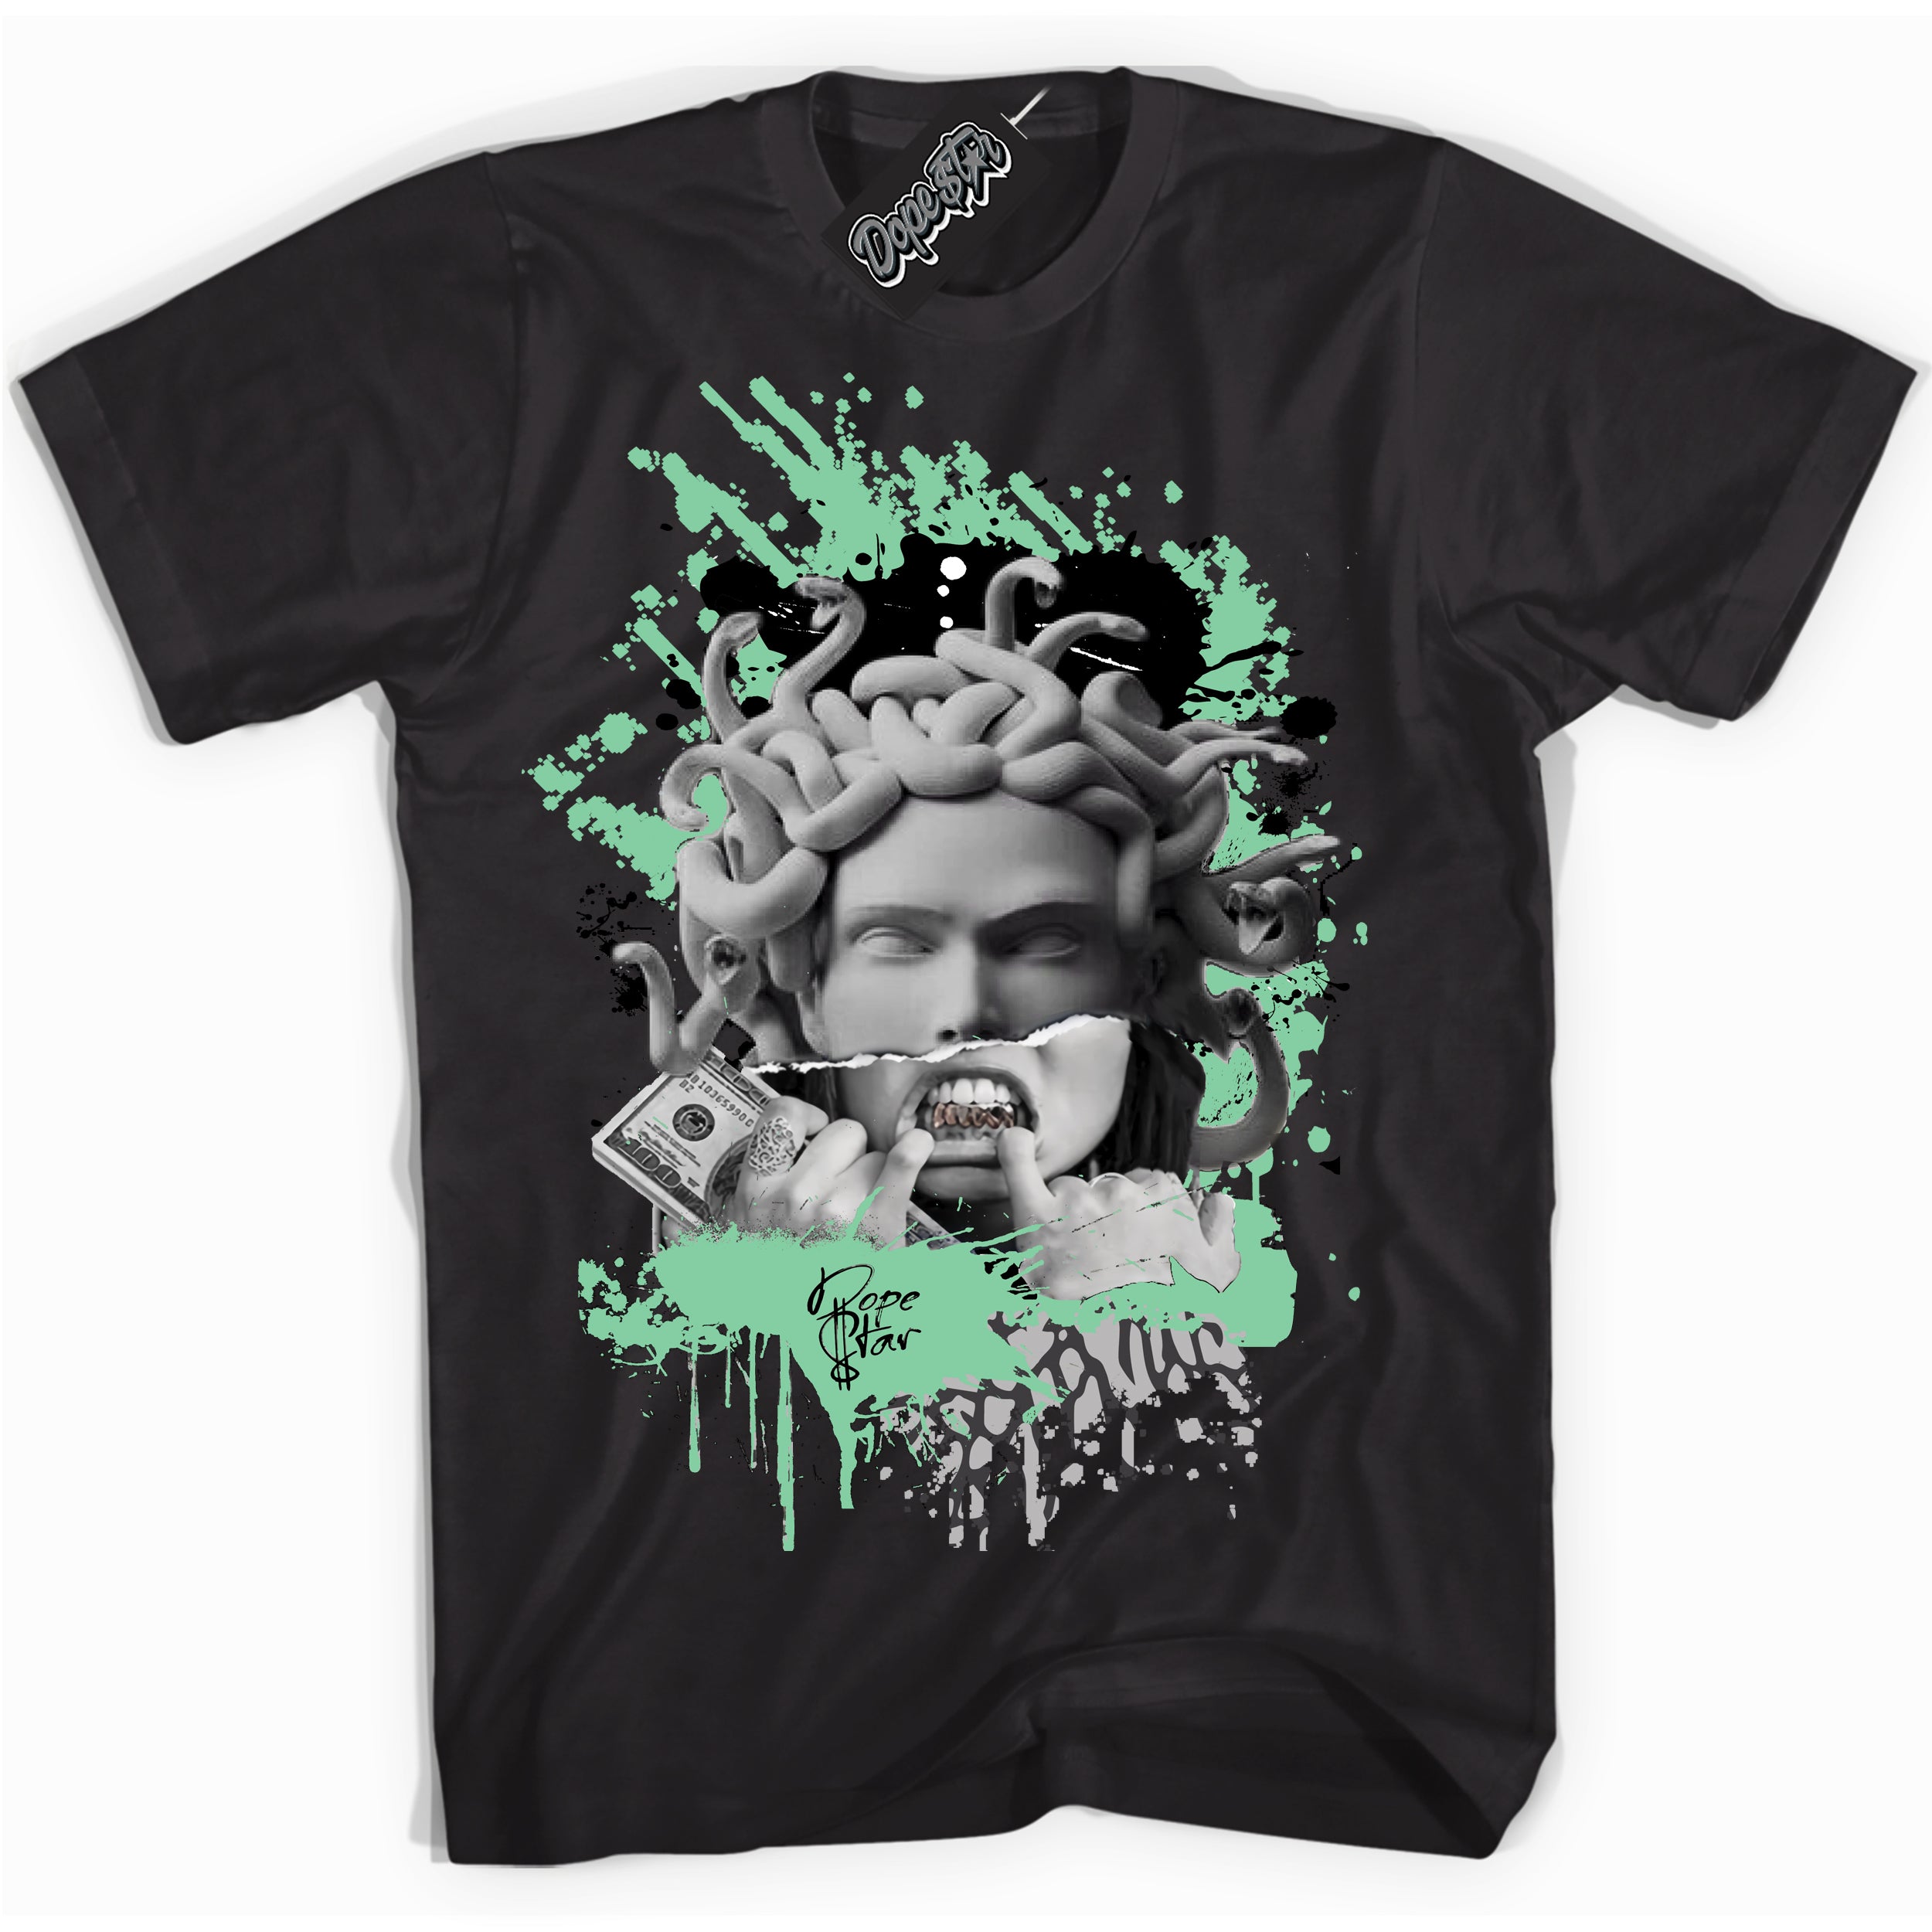 Cool Black graphic tee with “ Medusa ” design, that perfectly matches Green Glow 3s sneakers 